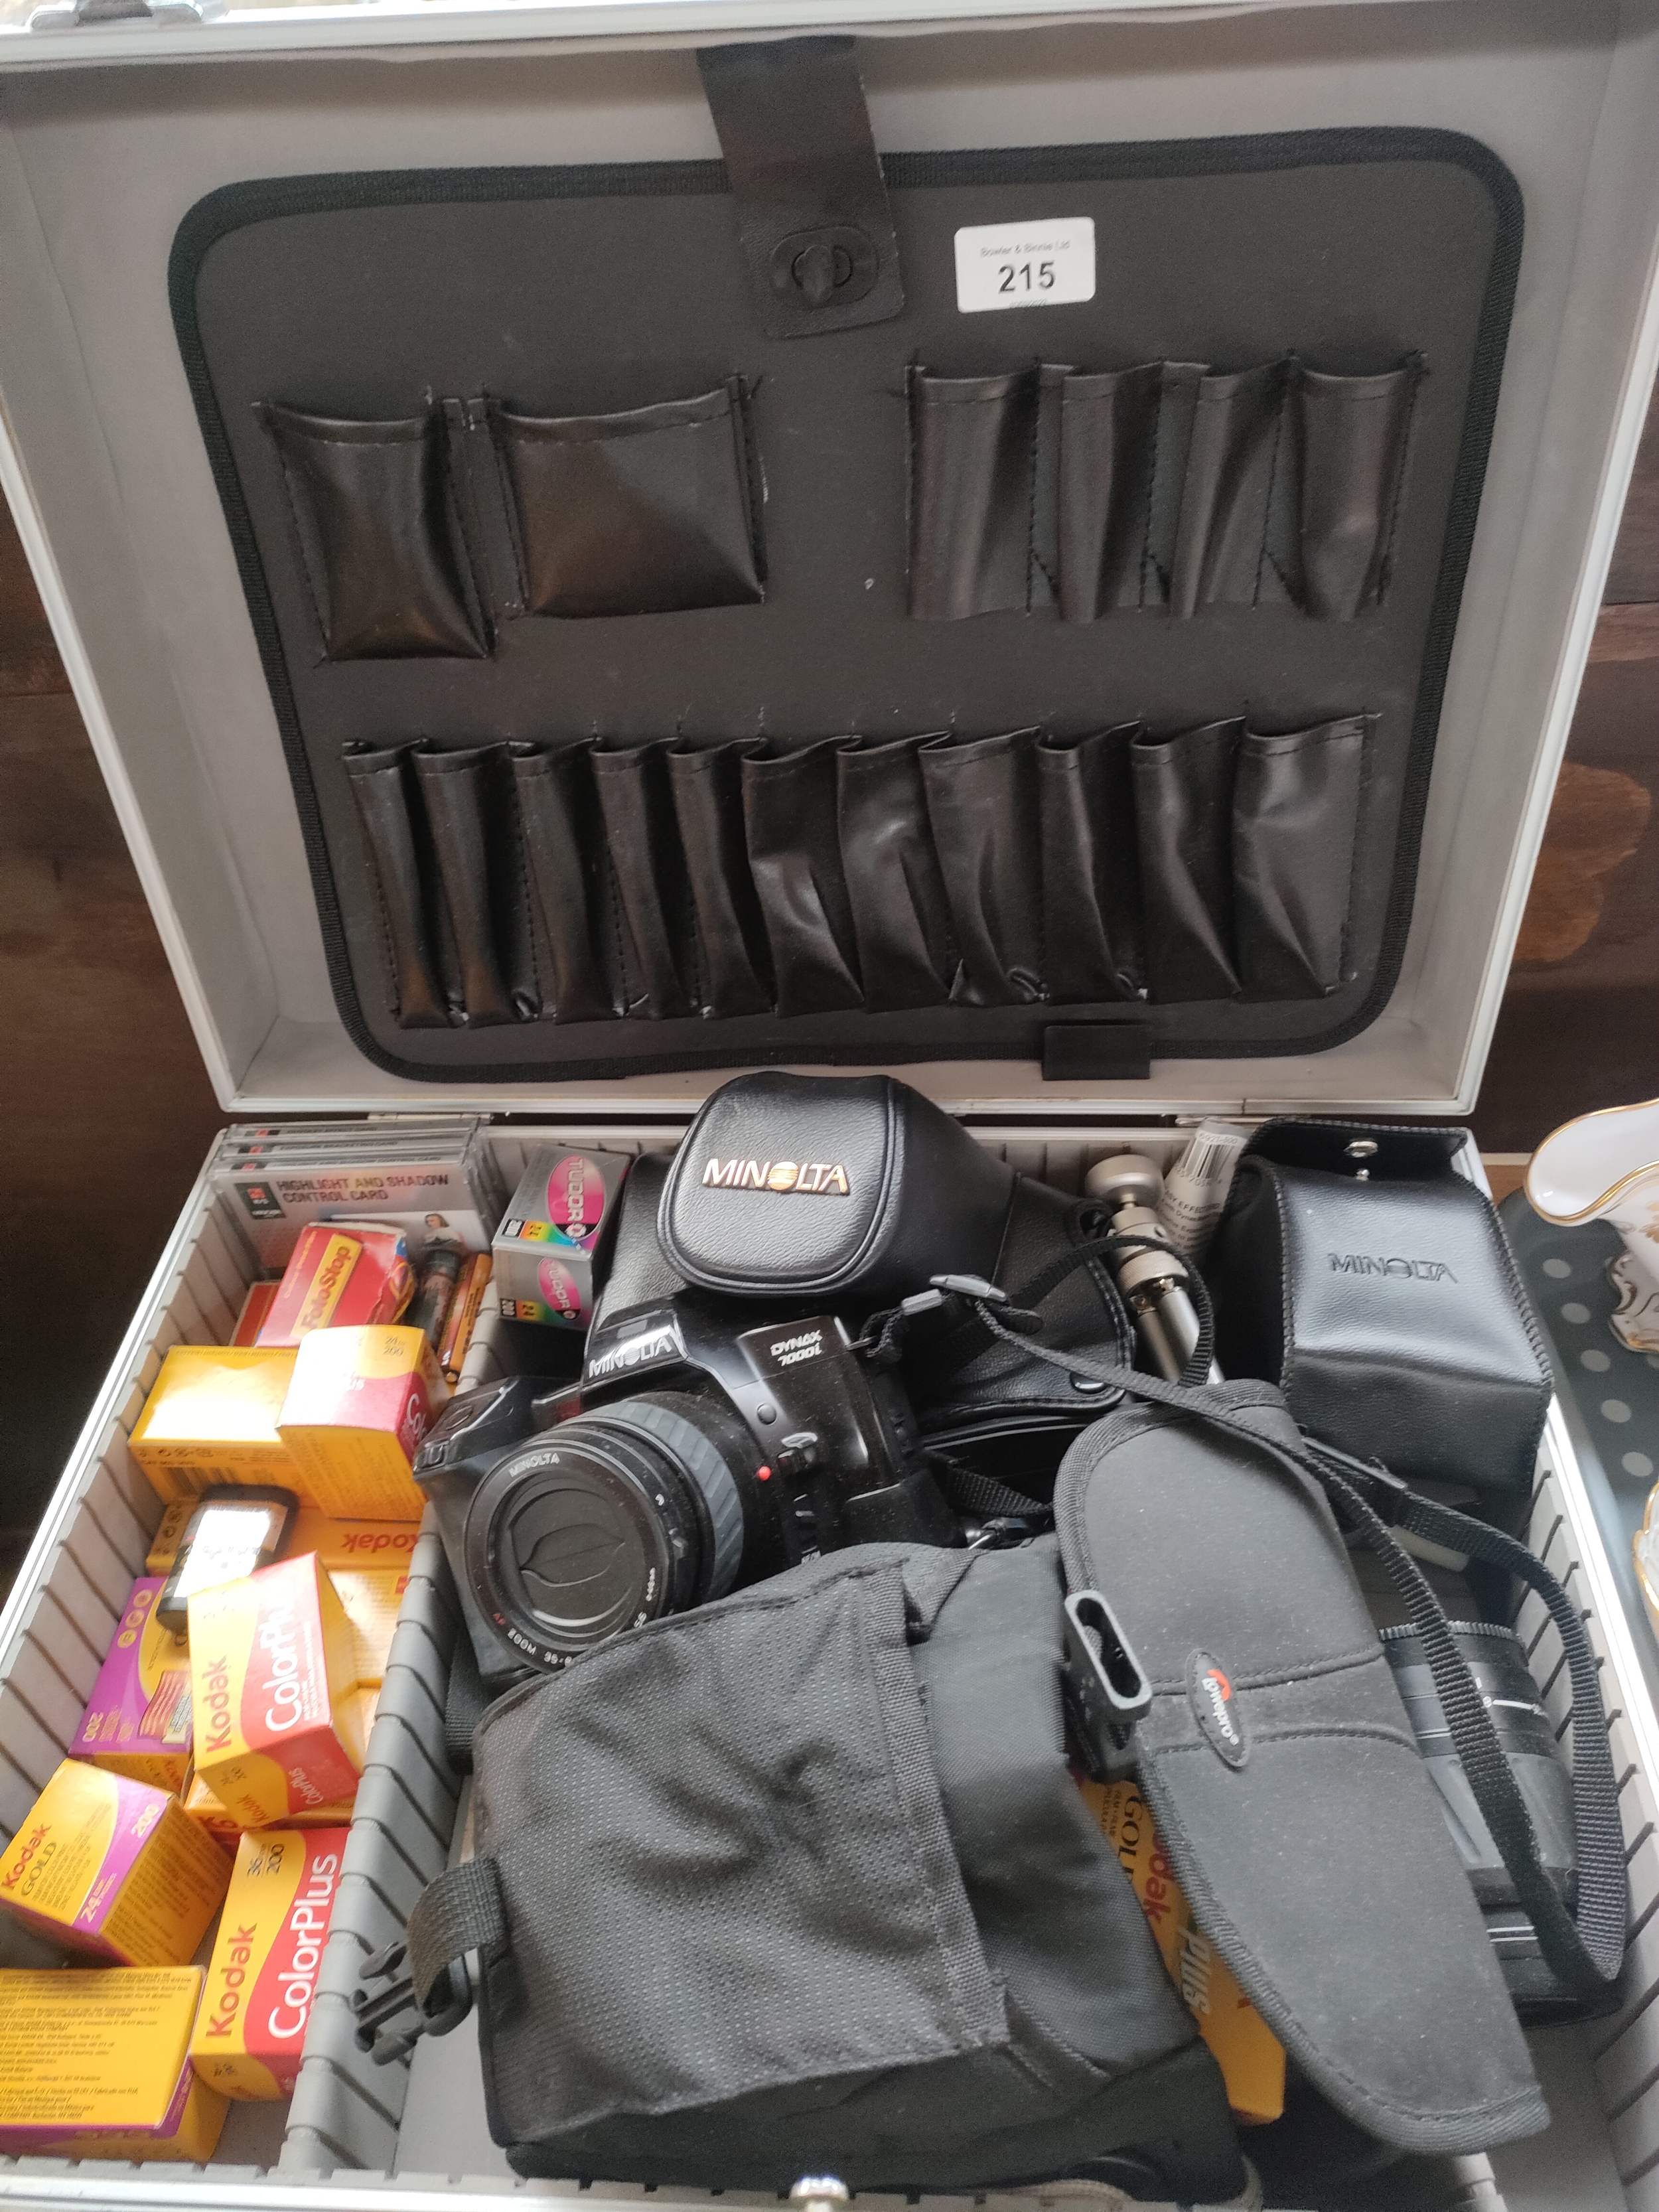 Minolta camera with accessories fitted in a case